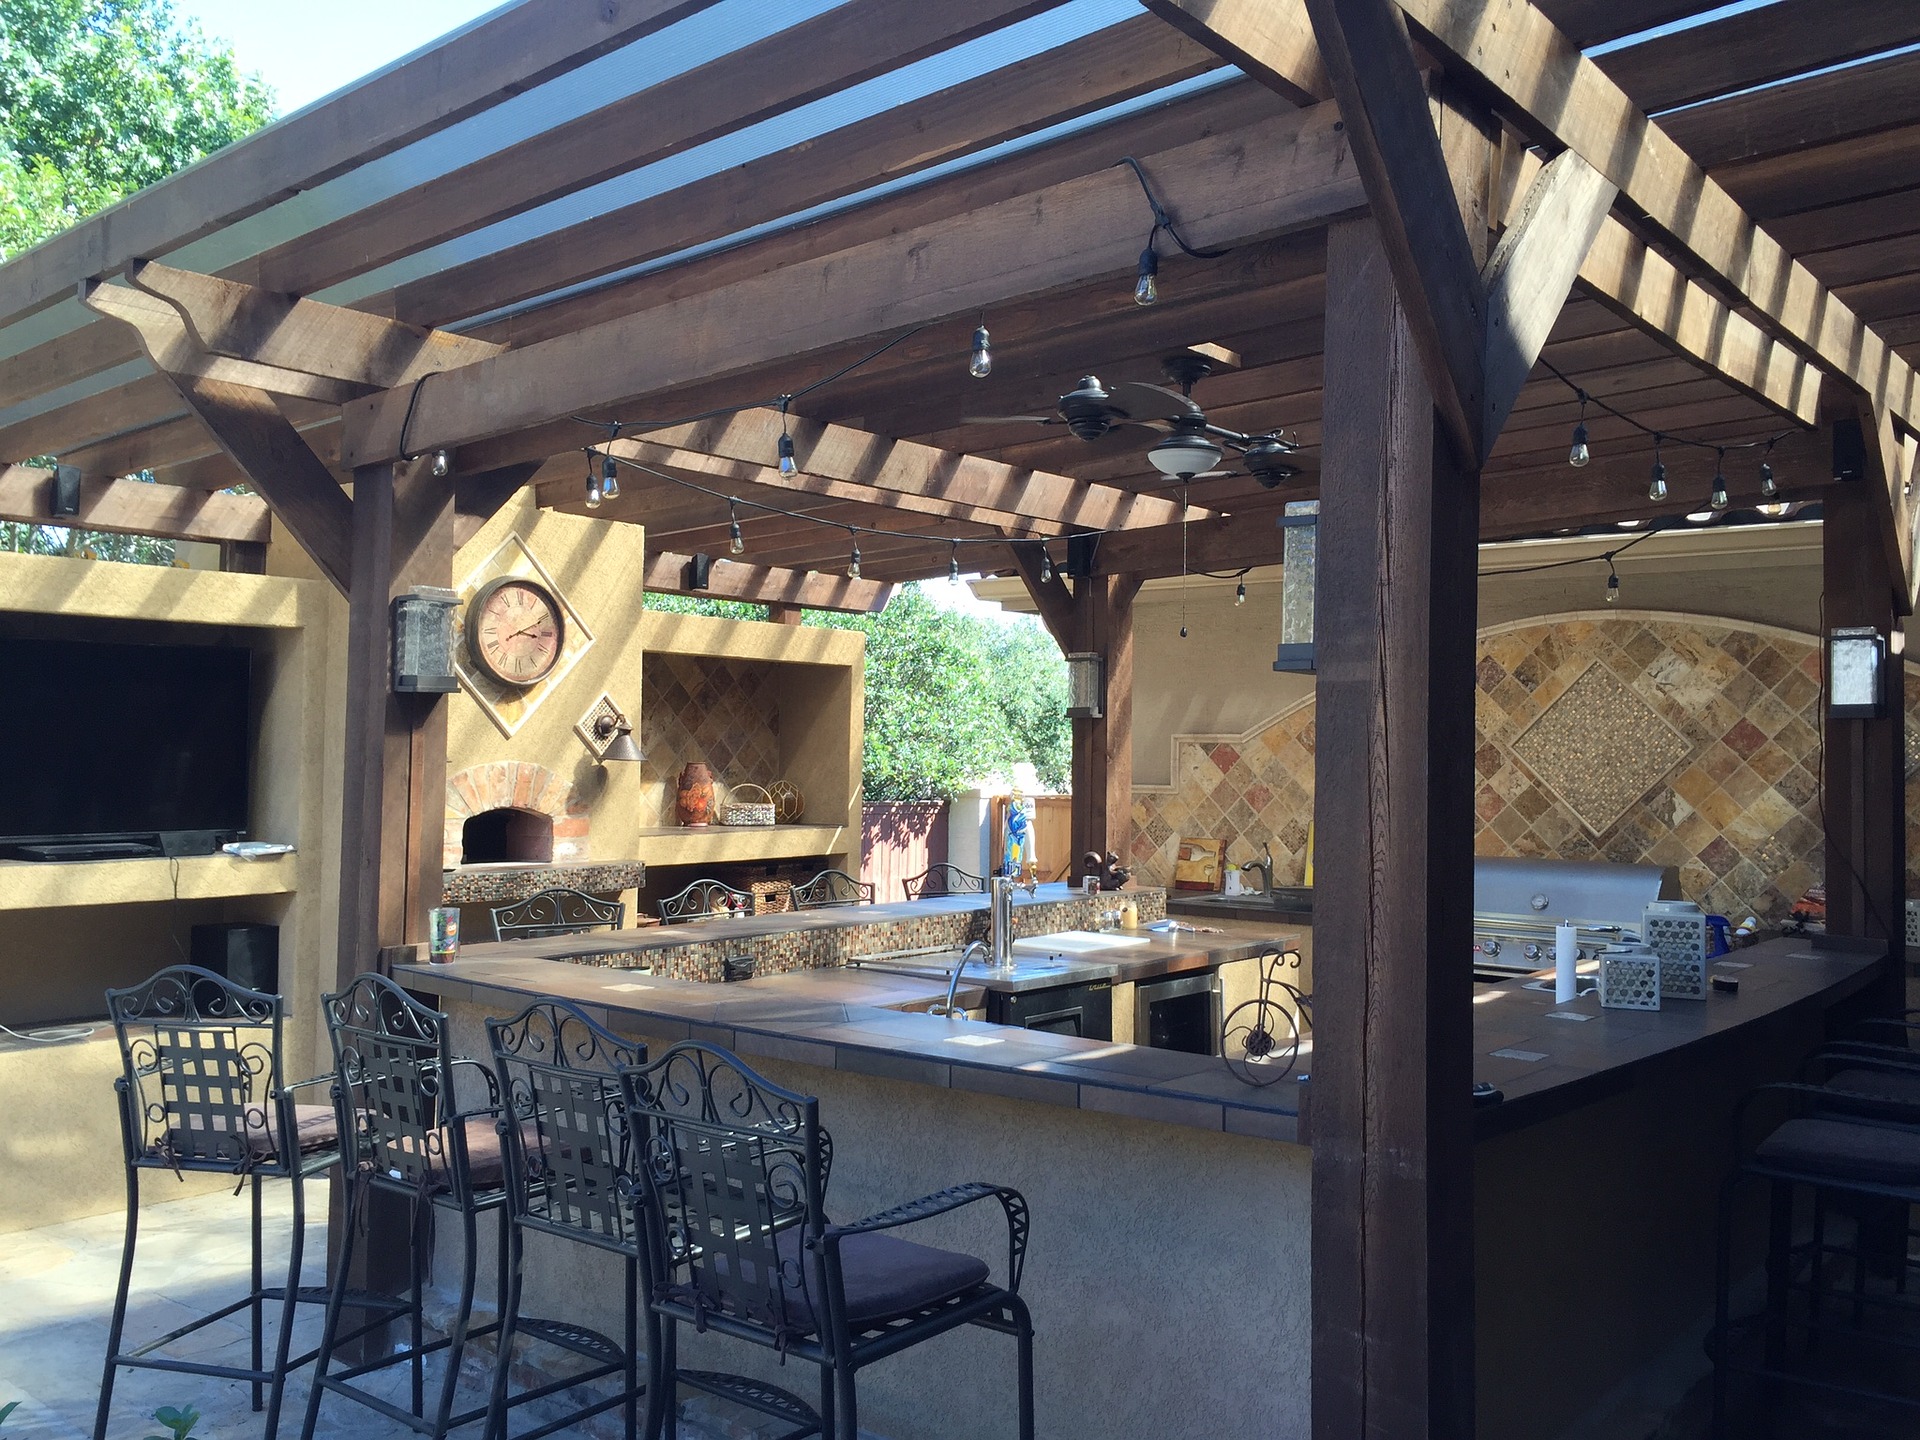 Detached roof structures can be the perfect addition for your dream outdoor living space.